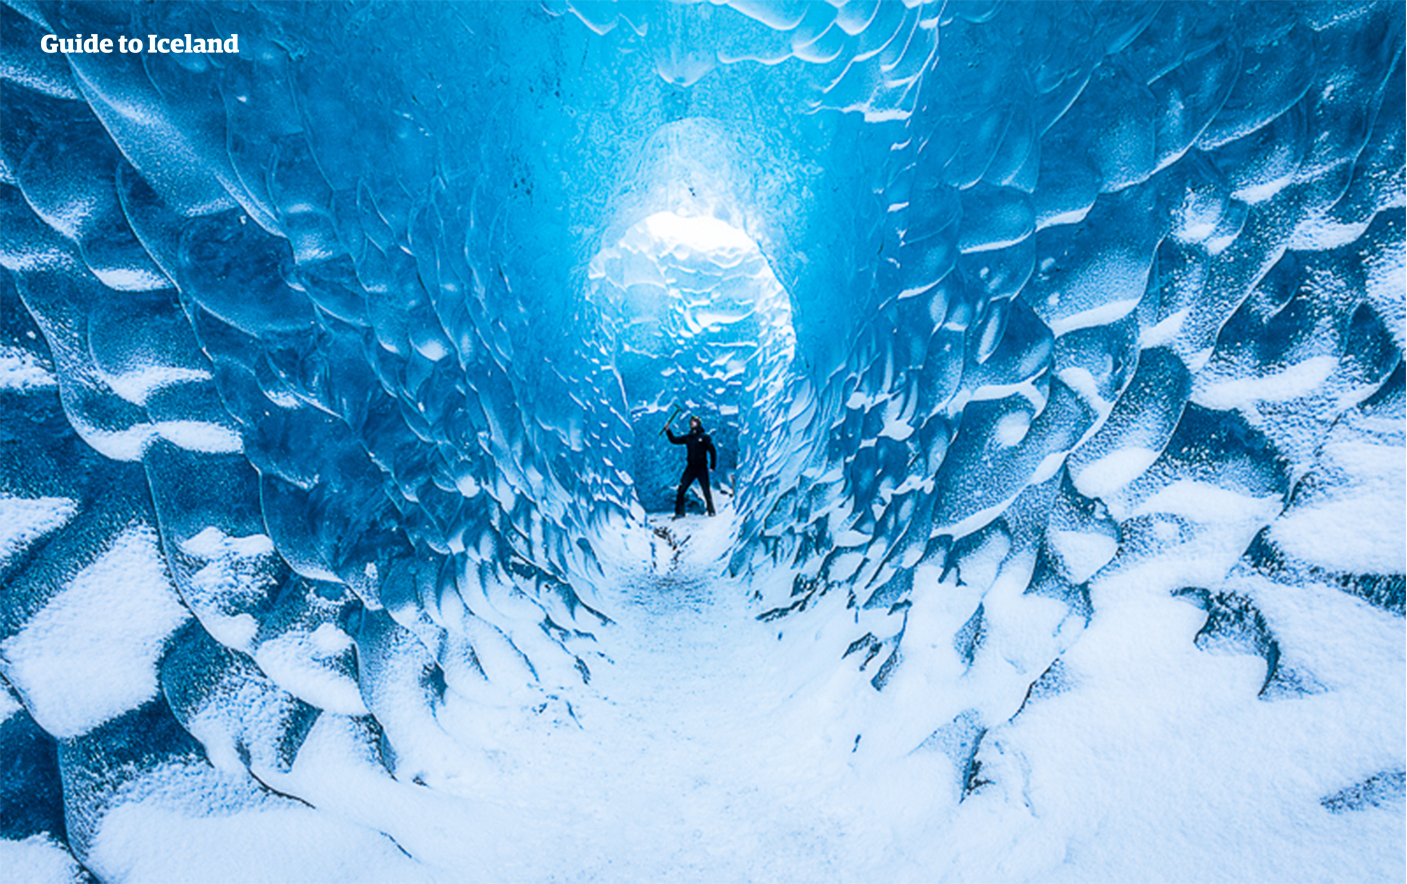 The ice caves inside the glaciers make for a memorable experience of a lifetime.